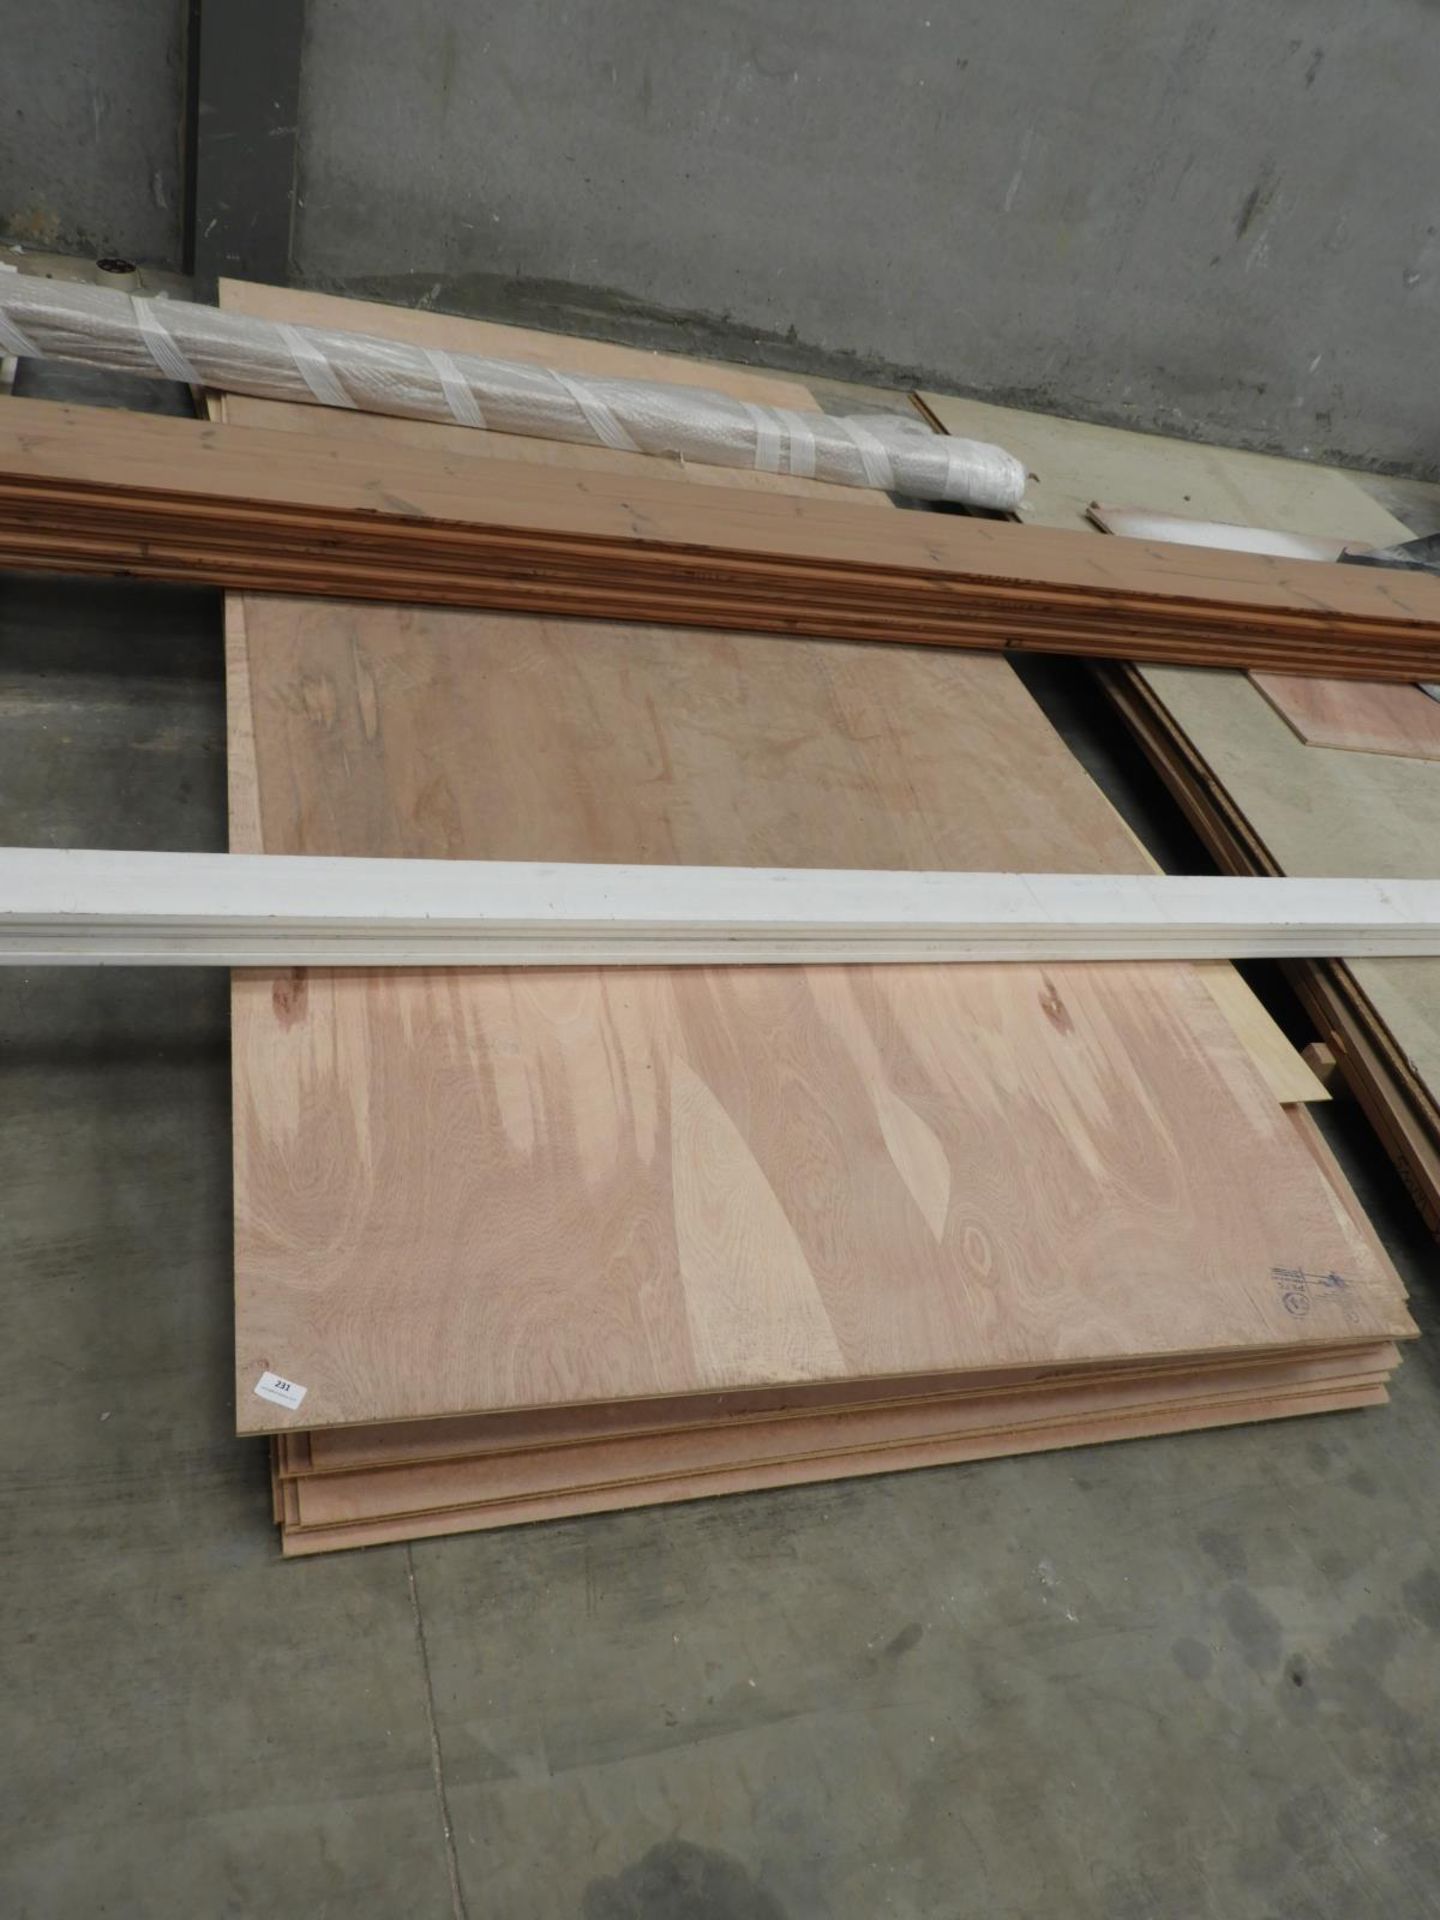 *Twelve Sheets of Hardboard and Various Pieces of Plywood Sheeting